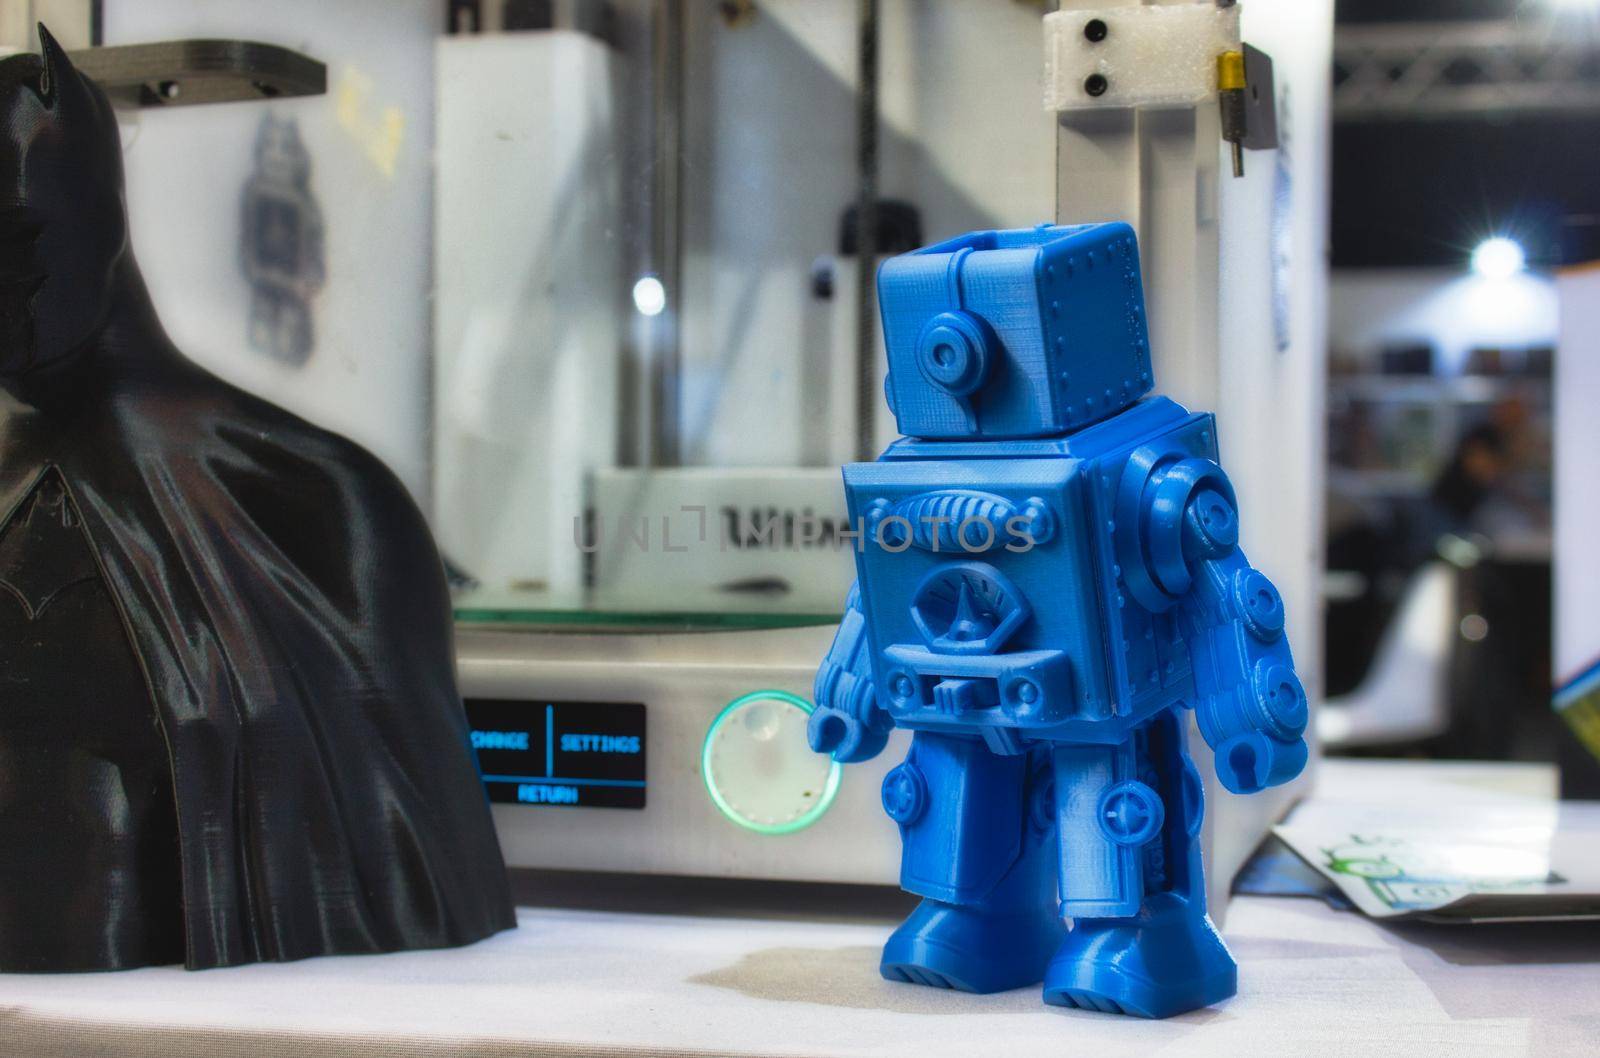 3D printed robot model next to a 3d printer at a technology and gadget fair by tennesseewitney